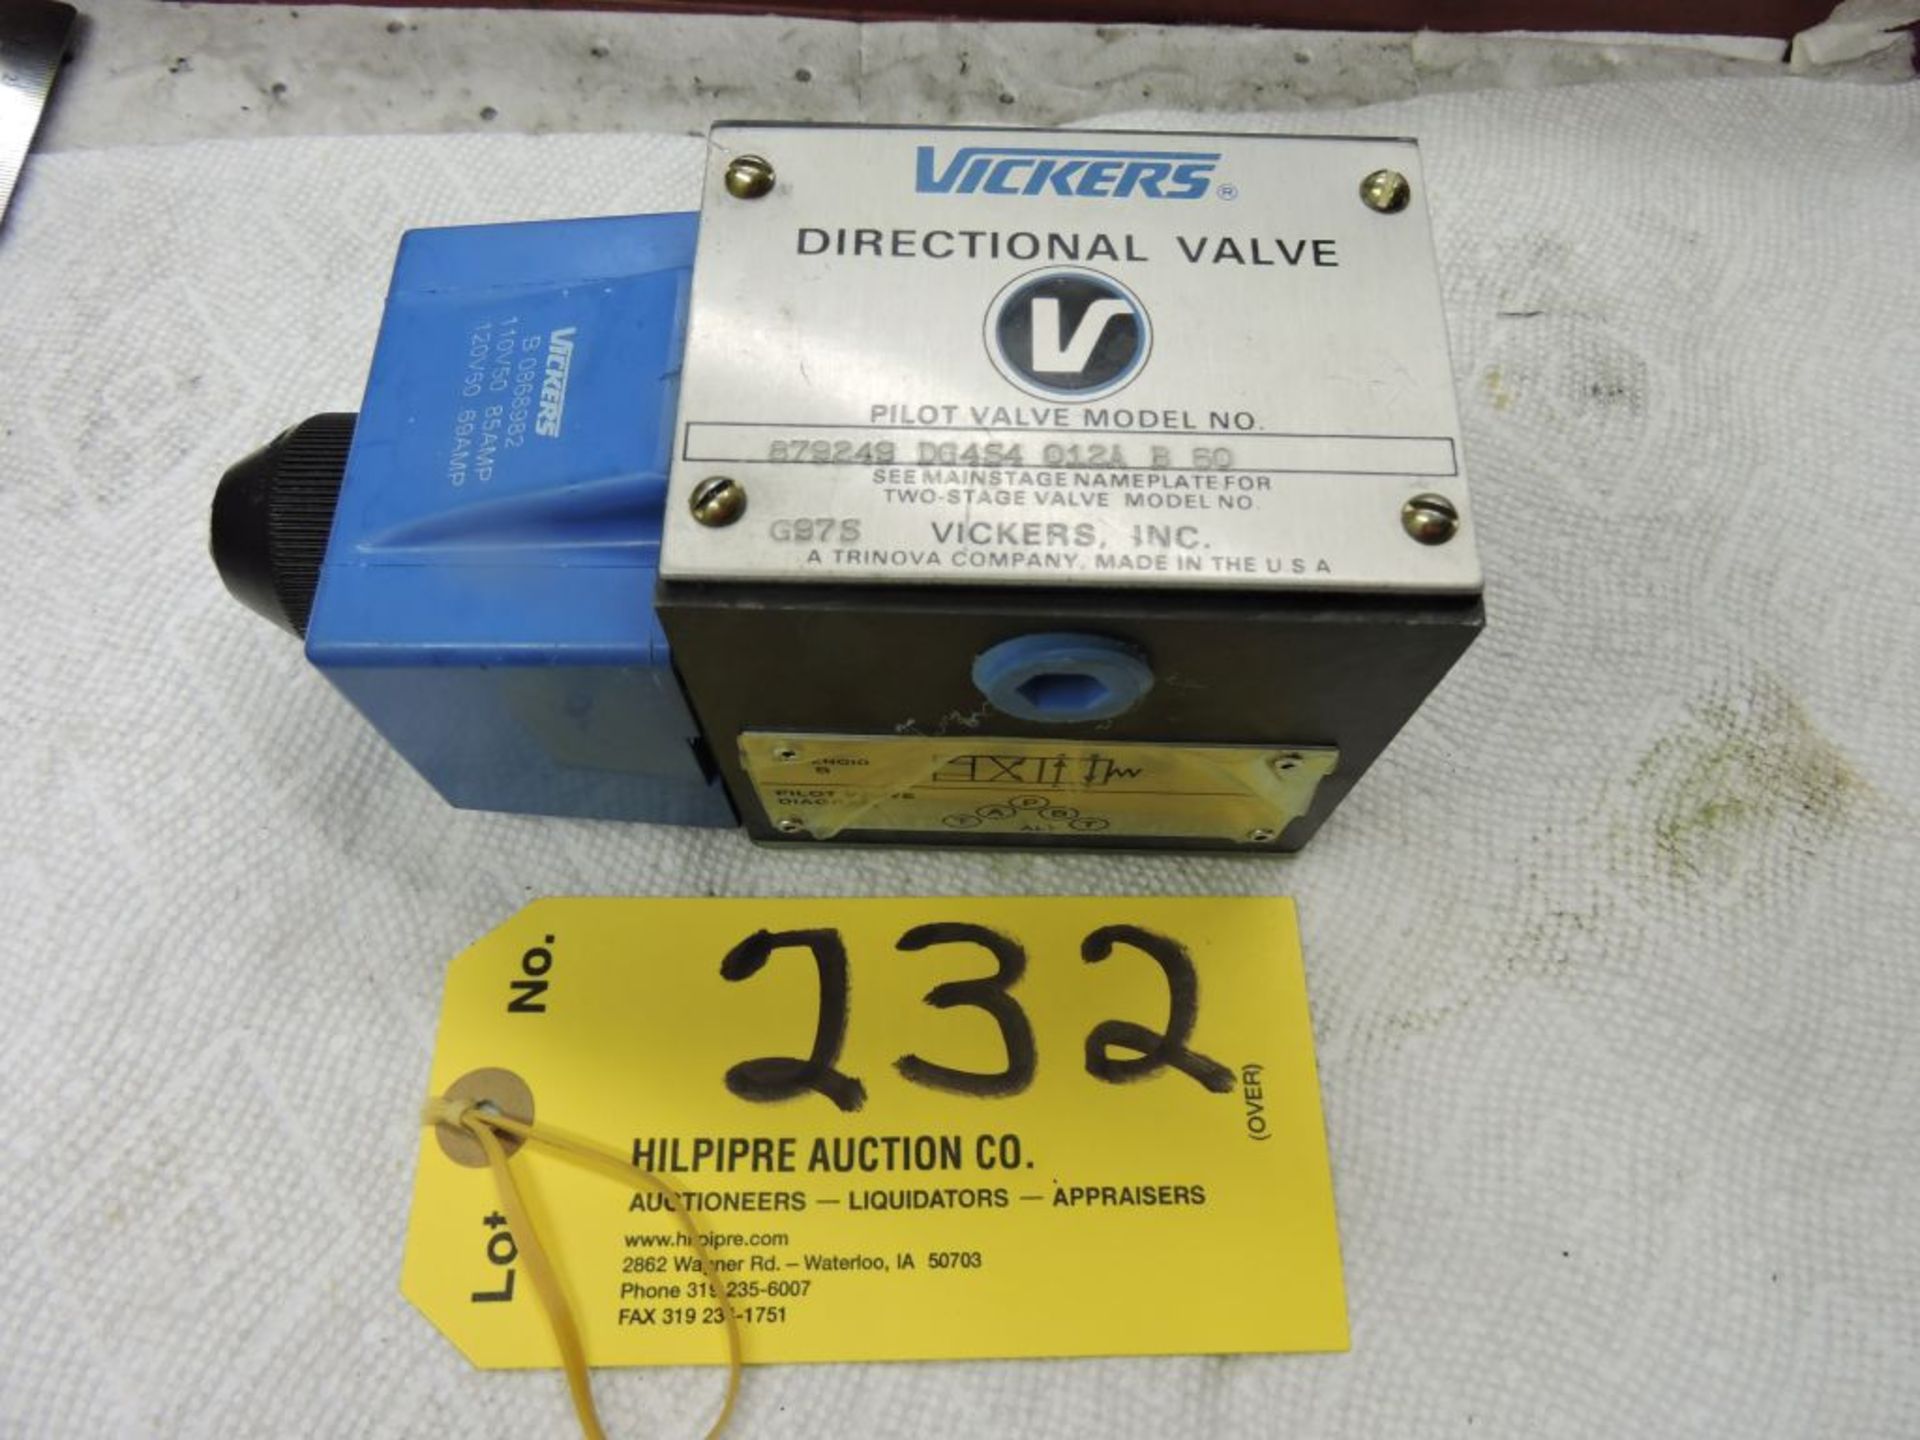 Vickers Directional valve: 879249D6454012ab60.